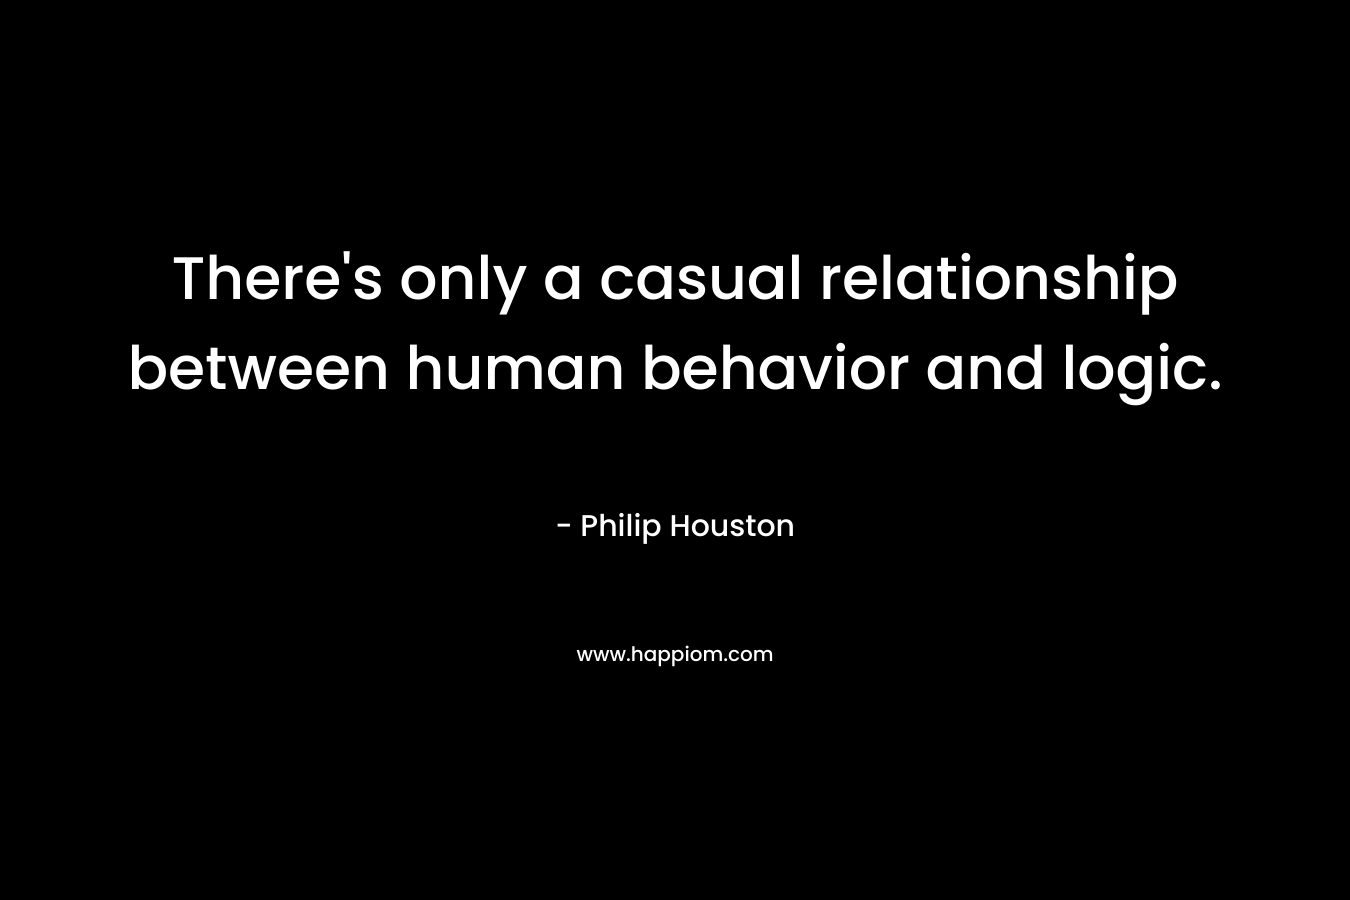 There's only a casual relationship between human behavior and logic.